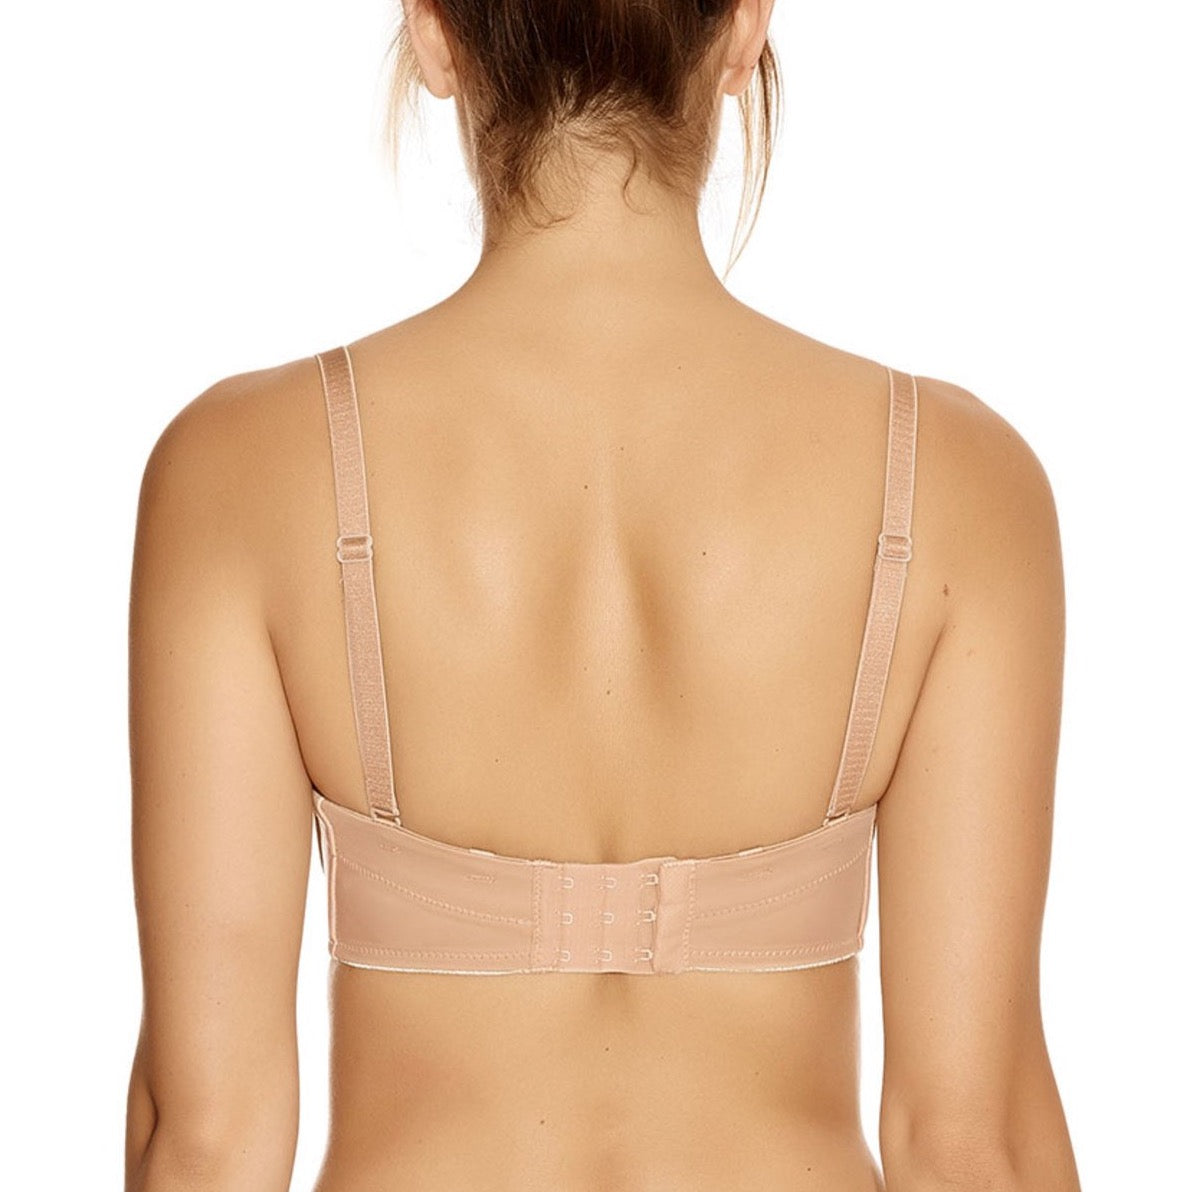 Fantasie Smoothing Strapless – Lingerie D'Amour